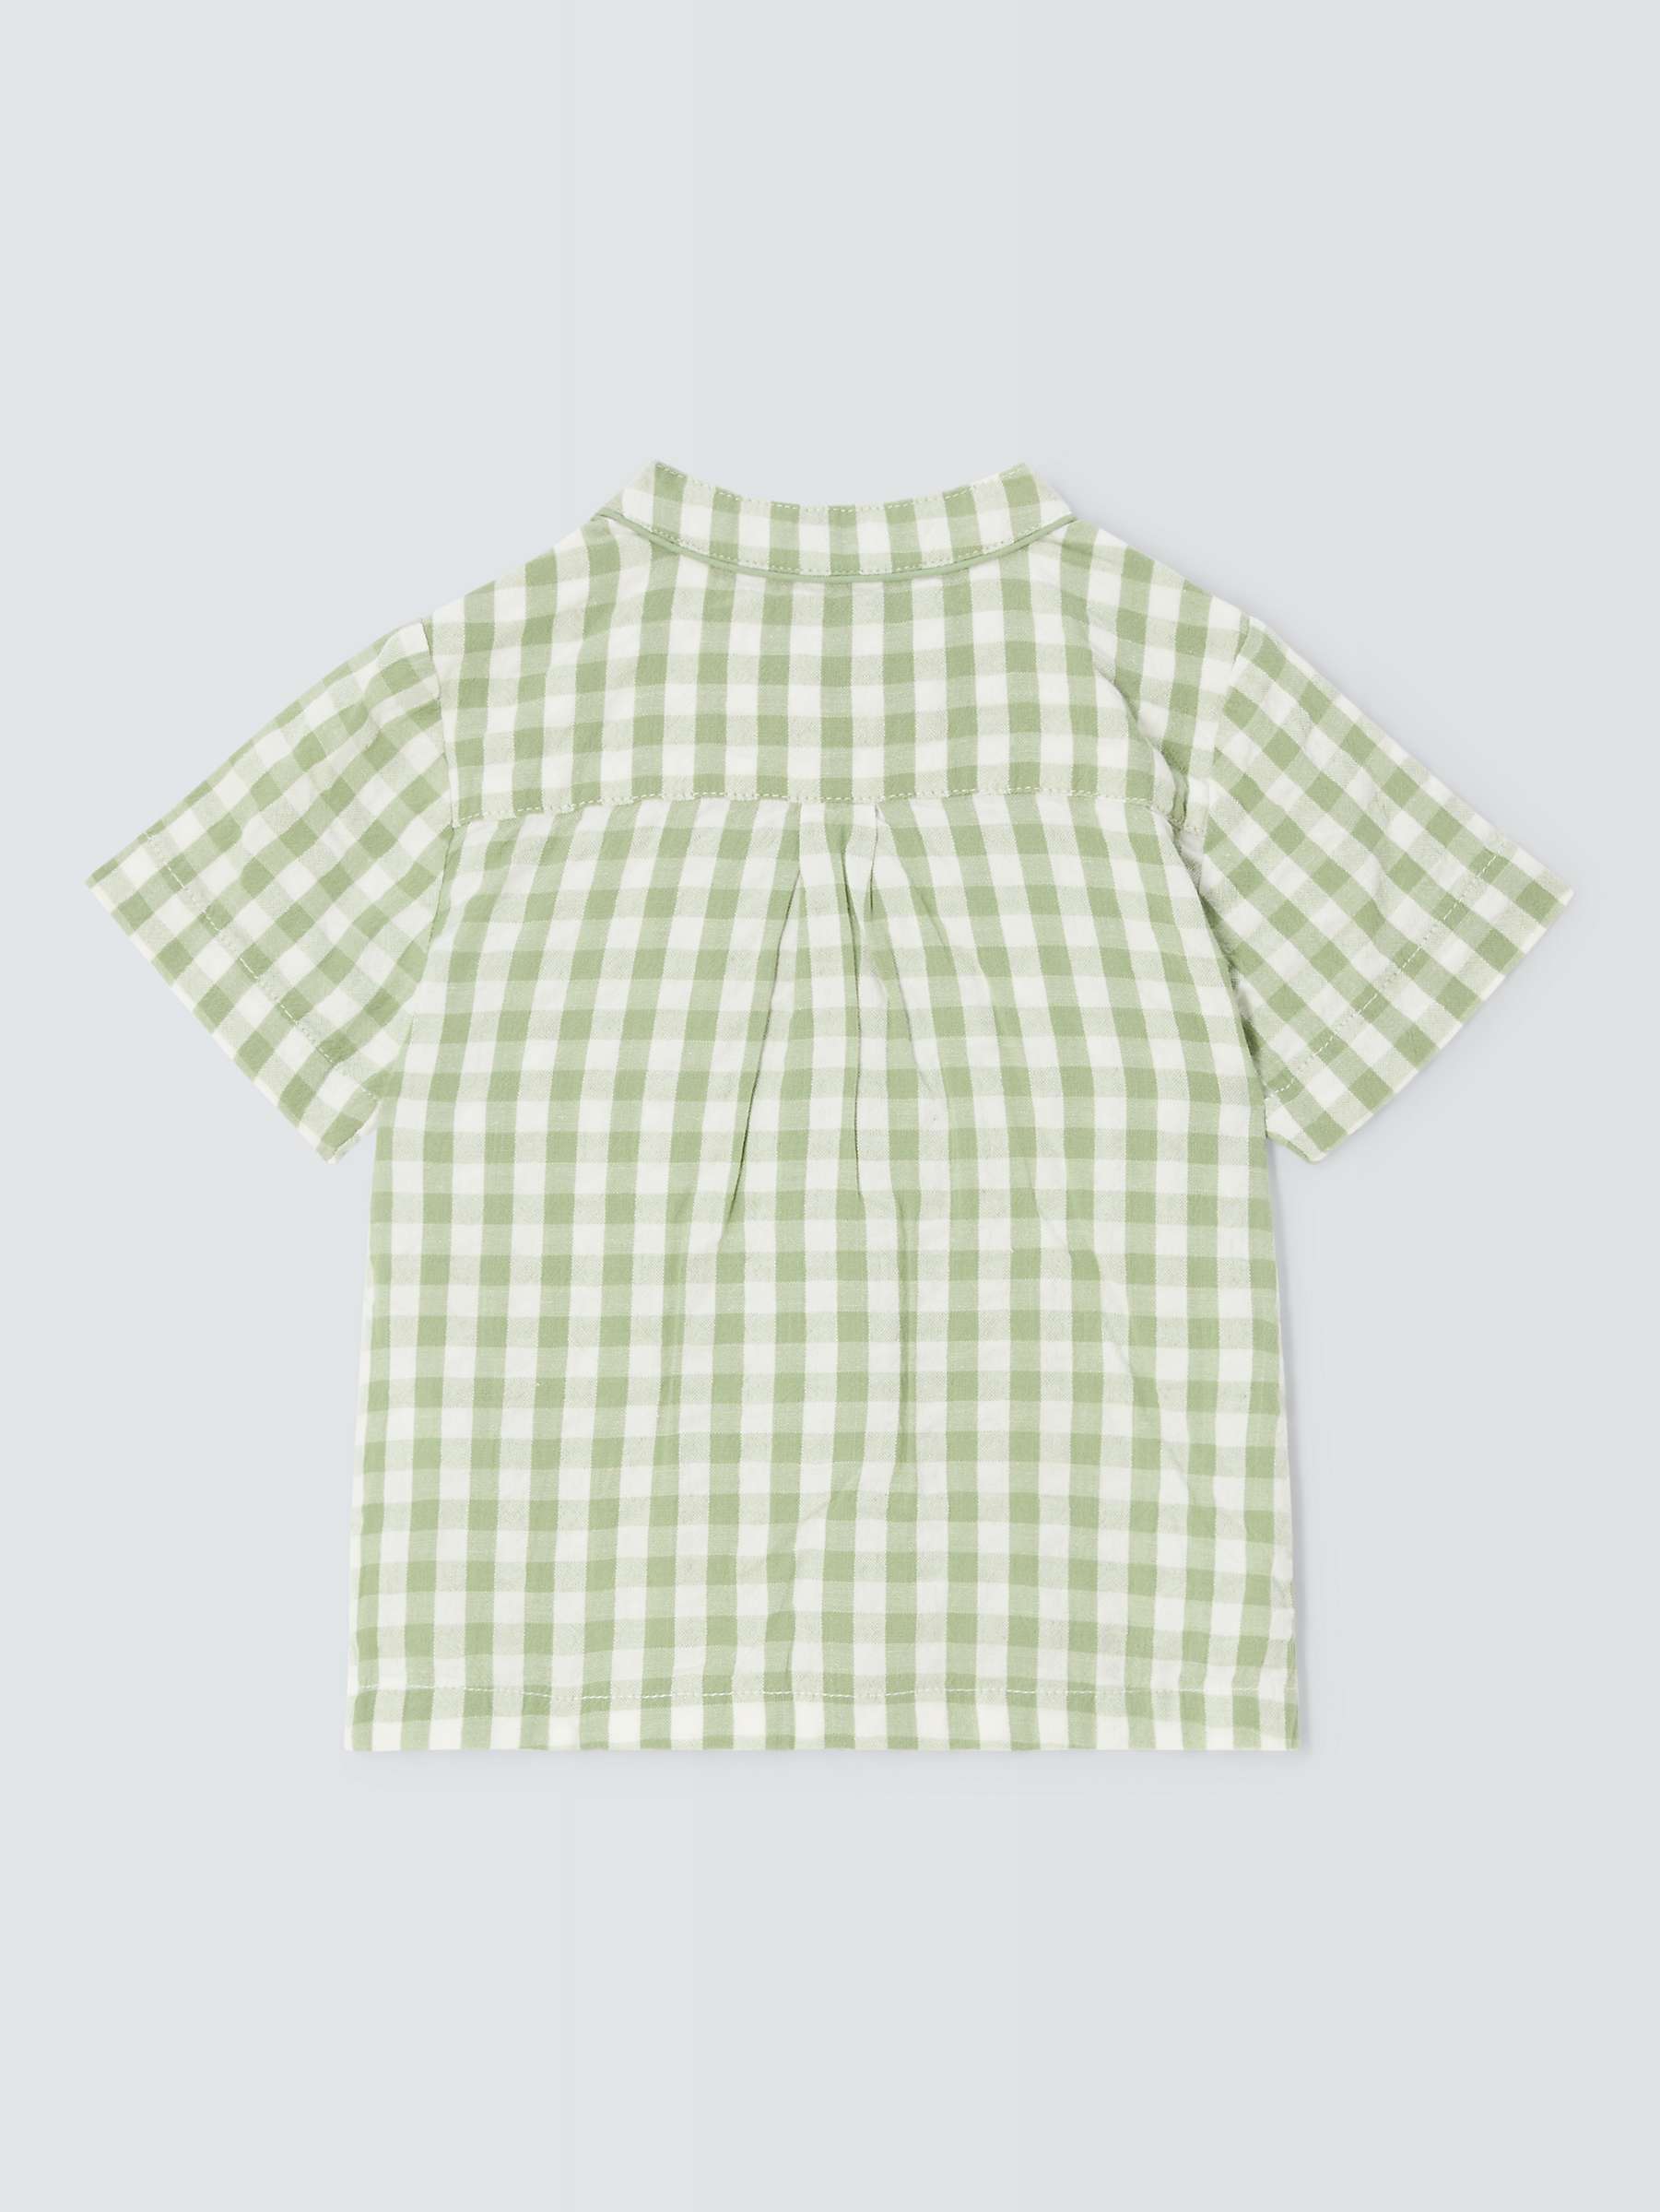 Buy John Lewis Heirloom Collection Baby Cotton Gingham Shirt, Green Online at johnlewis.com